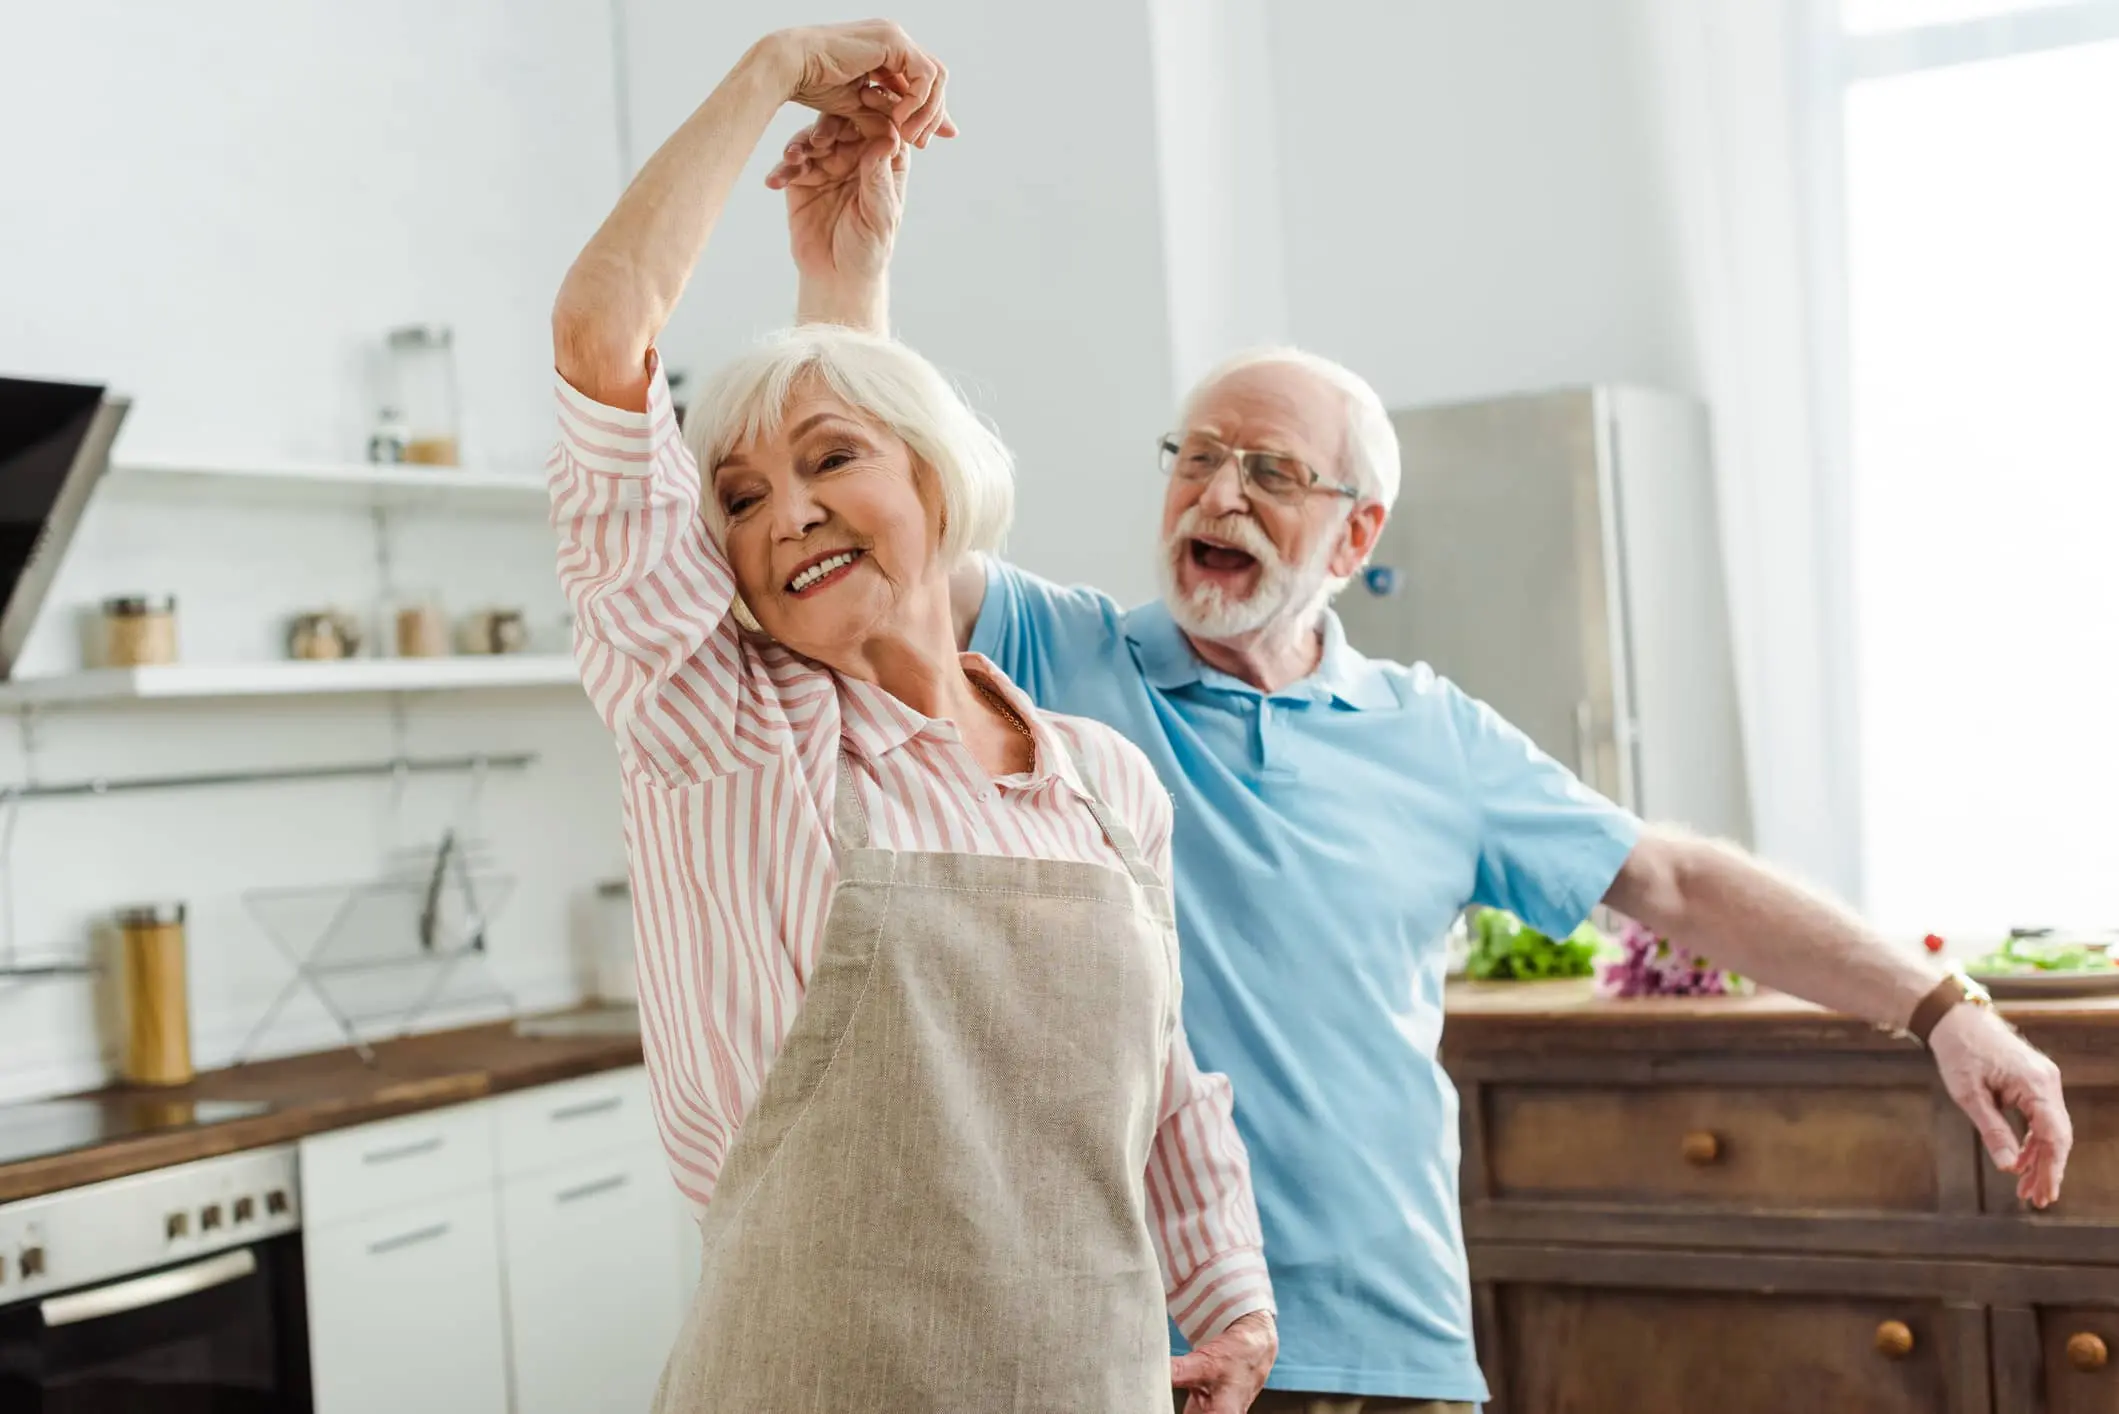 A mortgage in old age: Live and feel light in your own home, even after retirement